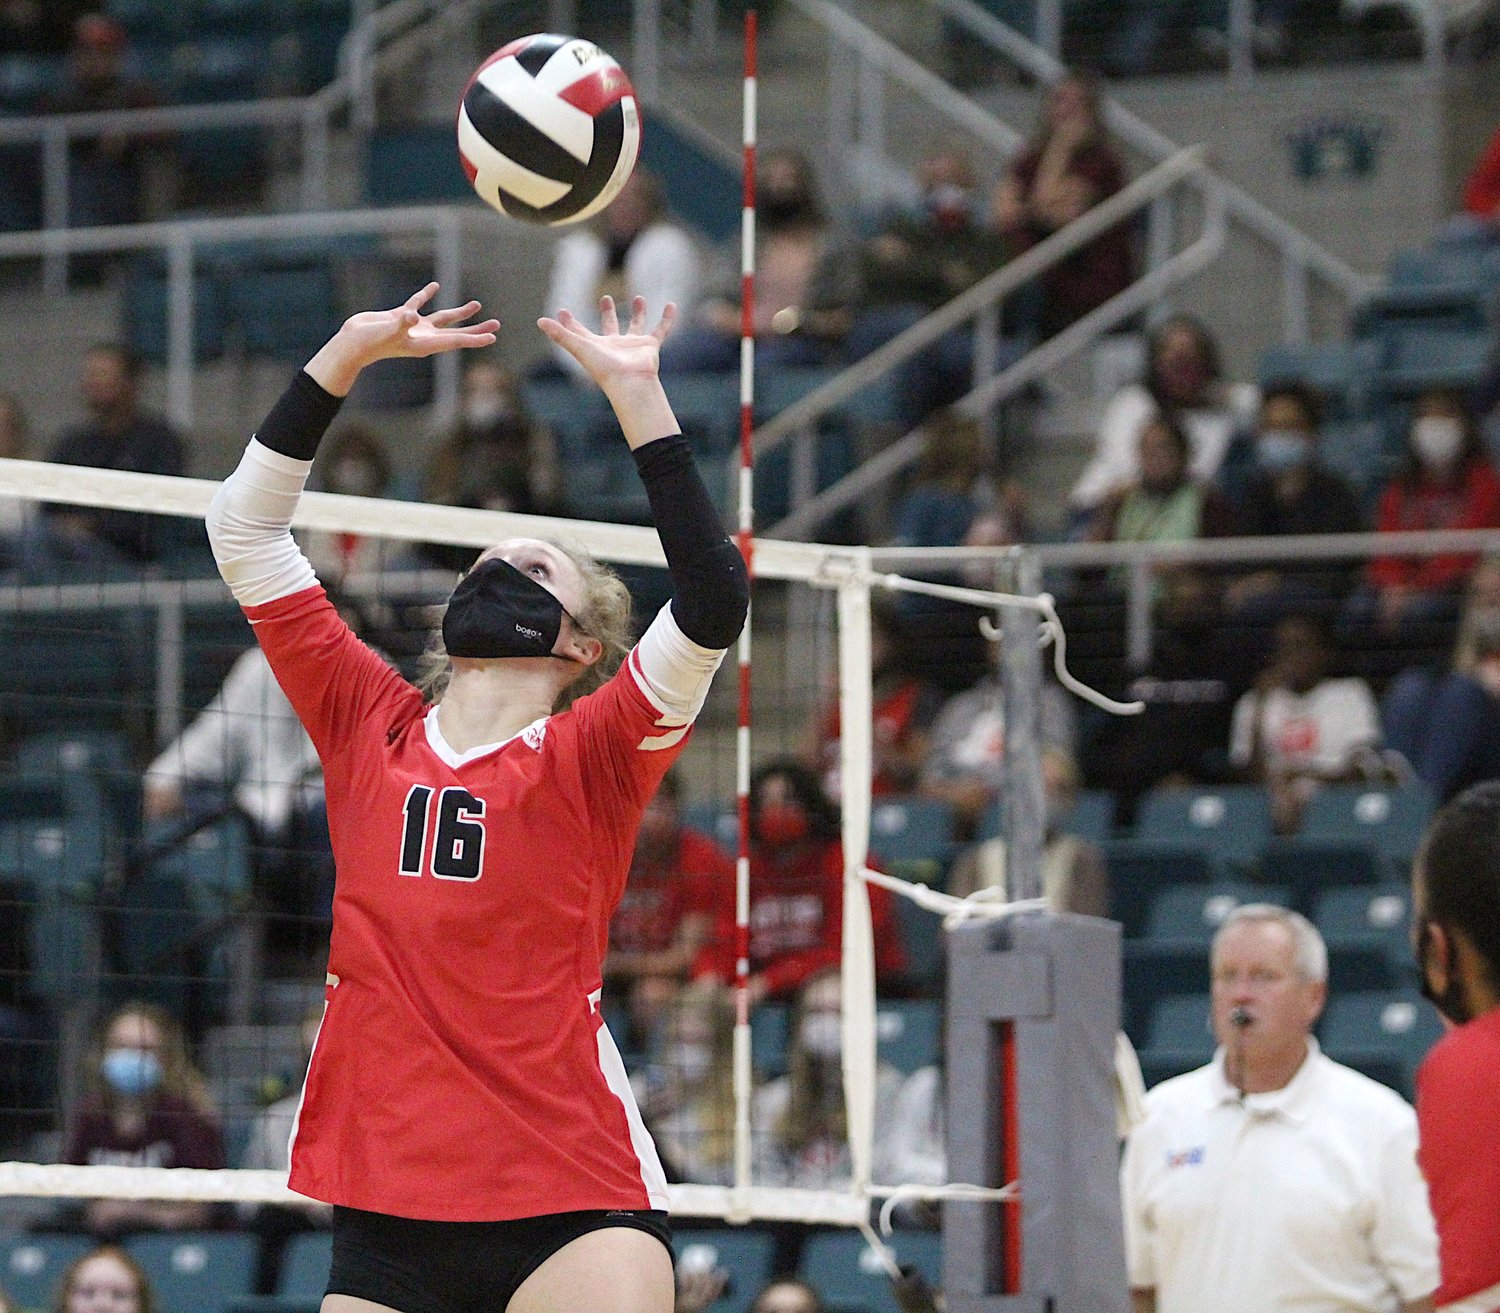 Katy High junior Maddie Waak was named District 19-6A's Outstanding Setter this season.